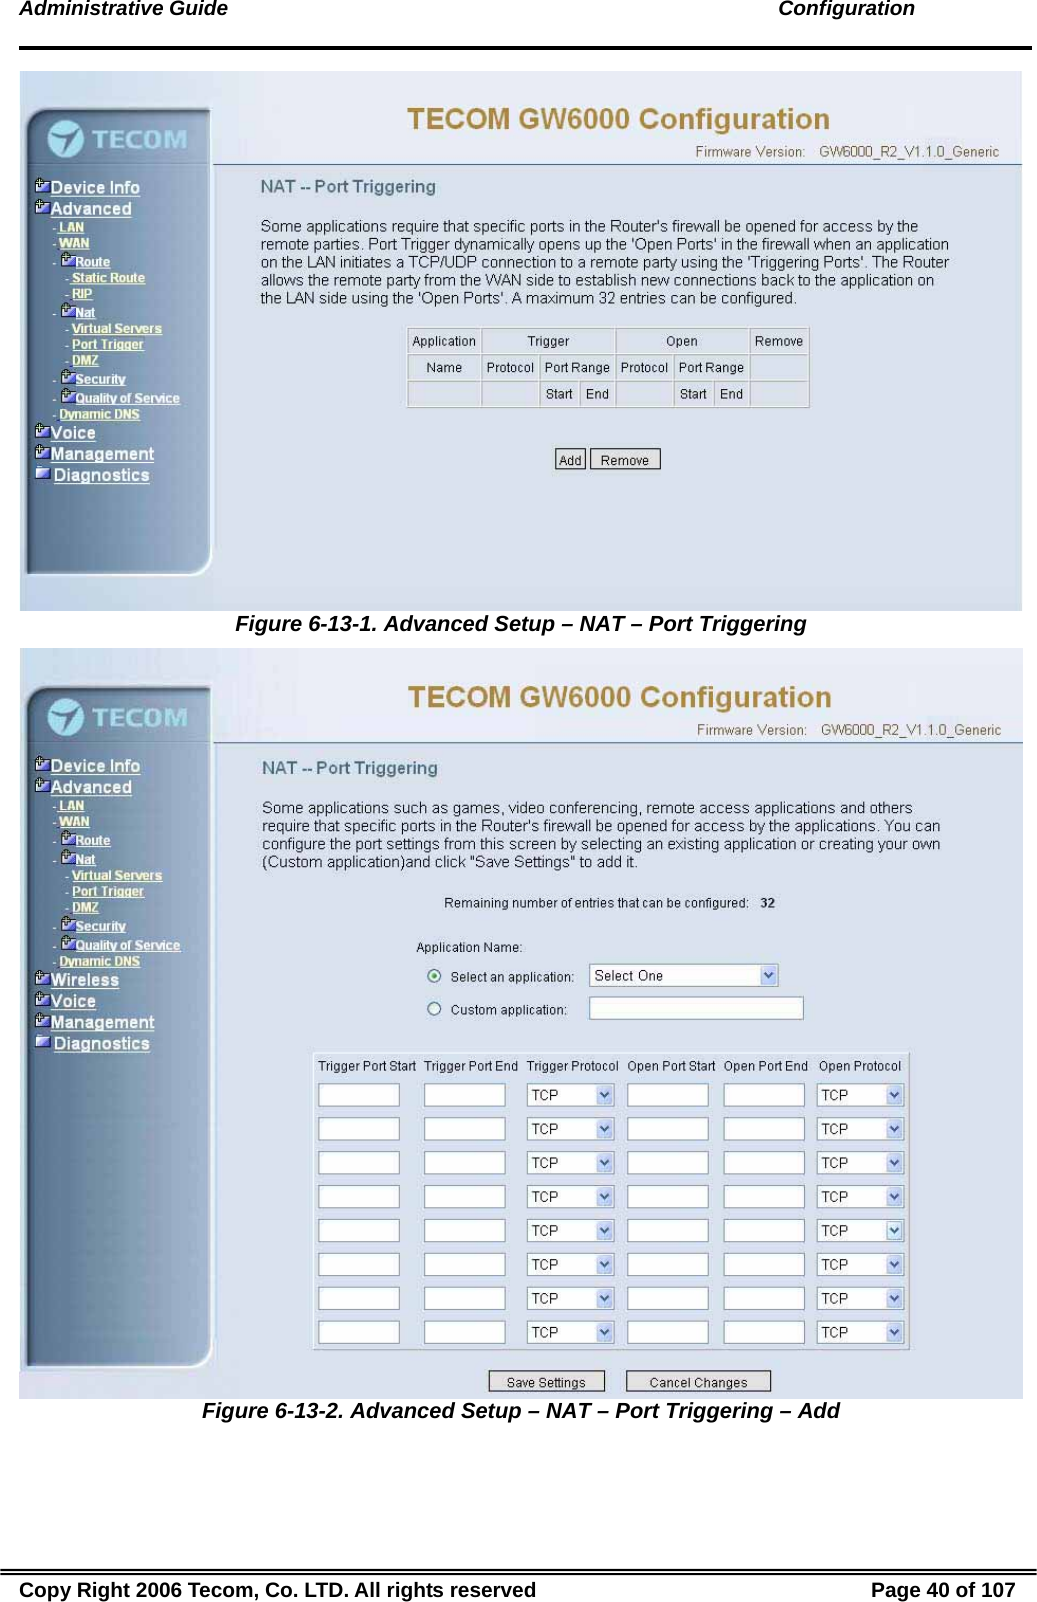 Administrative Guide                                                                                               Configuration  Figure 6-13-1. Advanced Setup – NAT – Port Triggering  Figure 6-13-2. Advanced Setup – NAT – Port Triggering – Add Copy Right 2006 Tecom, Co. LTD. All rights reserved  Page 40 of 107 